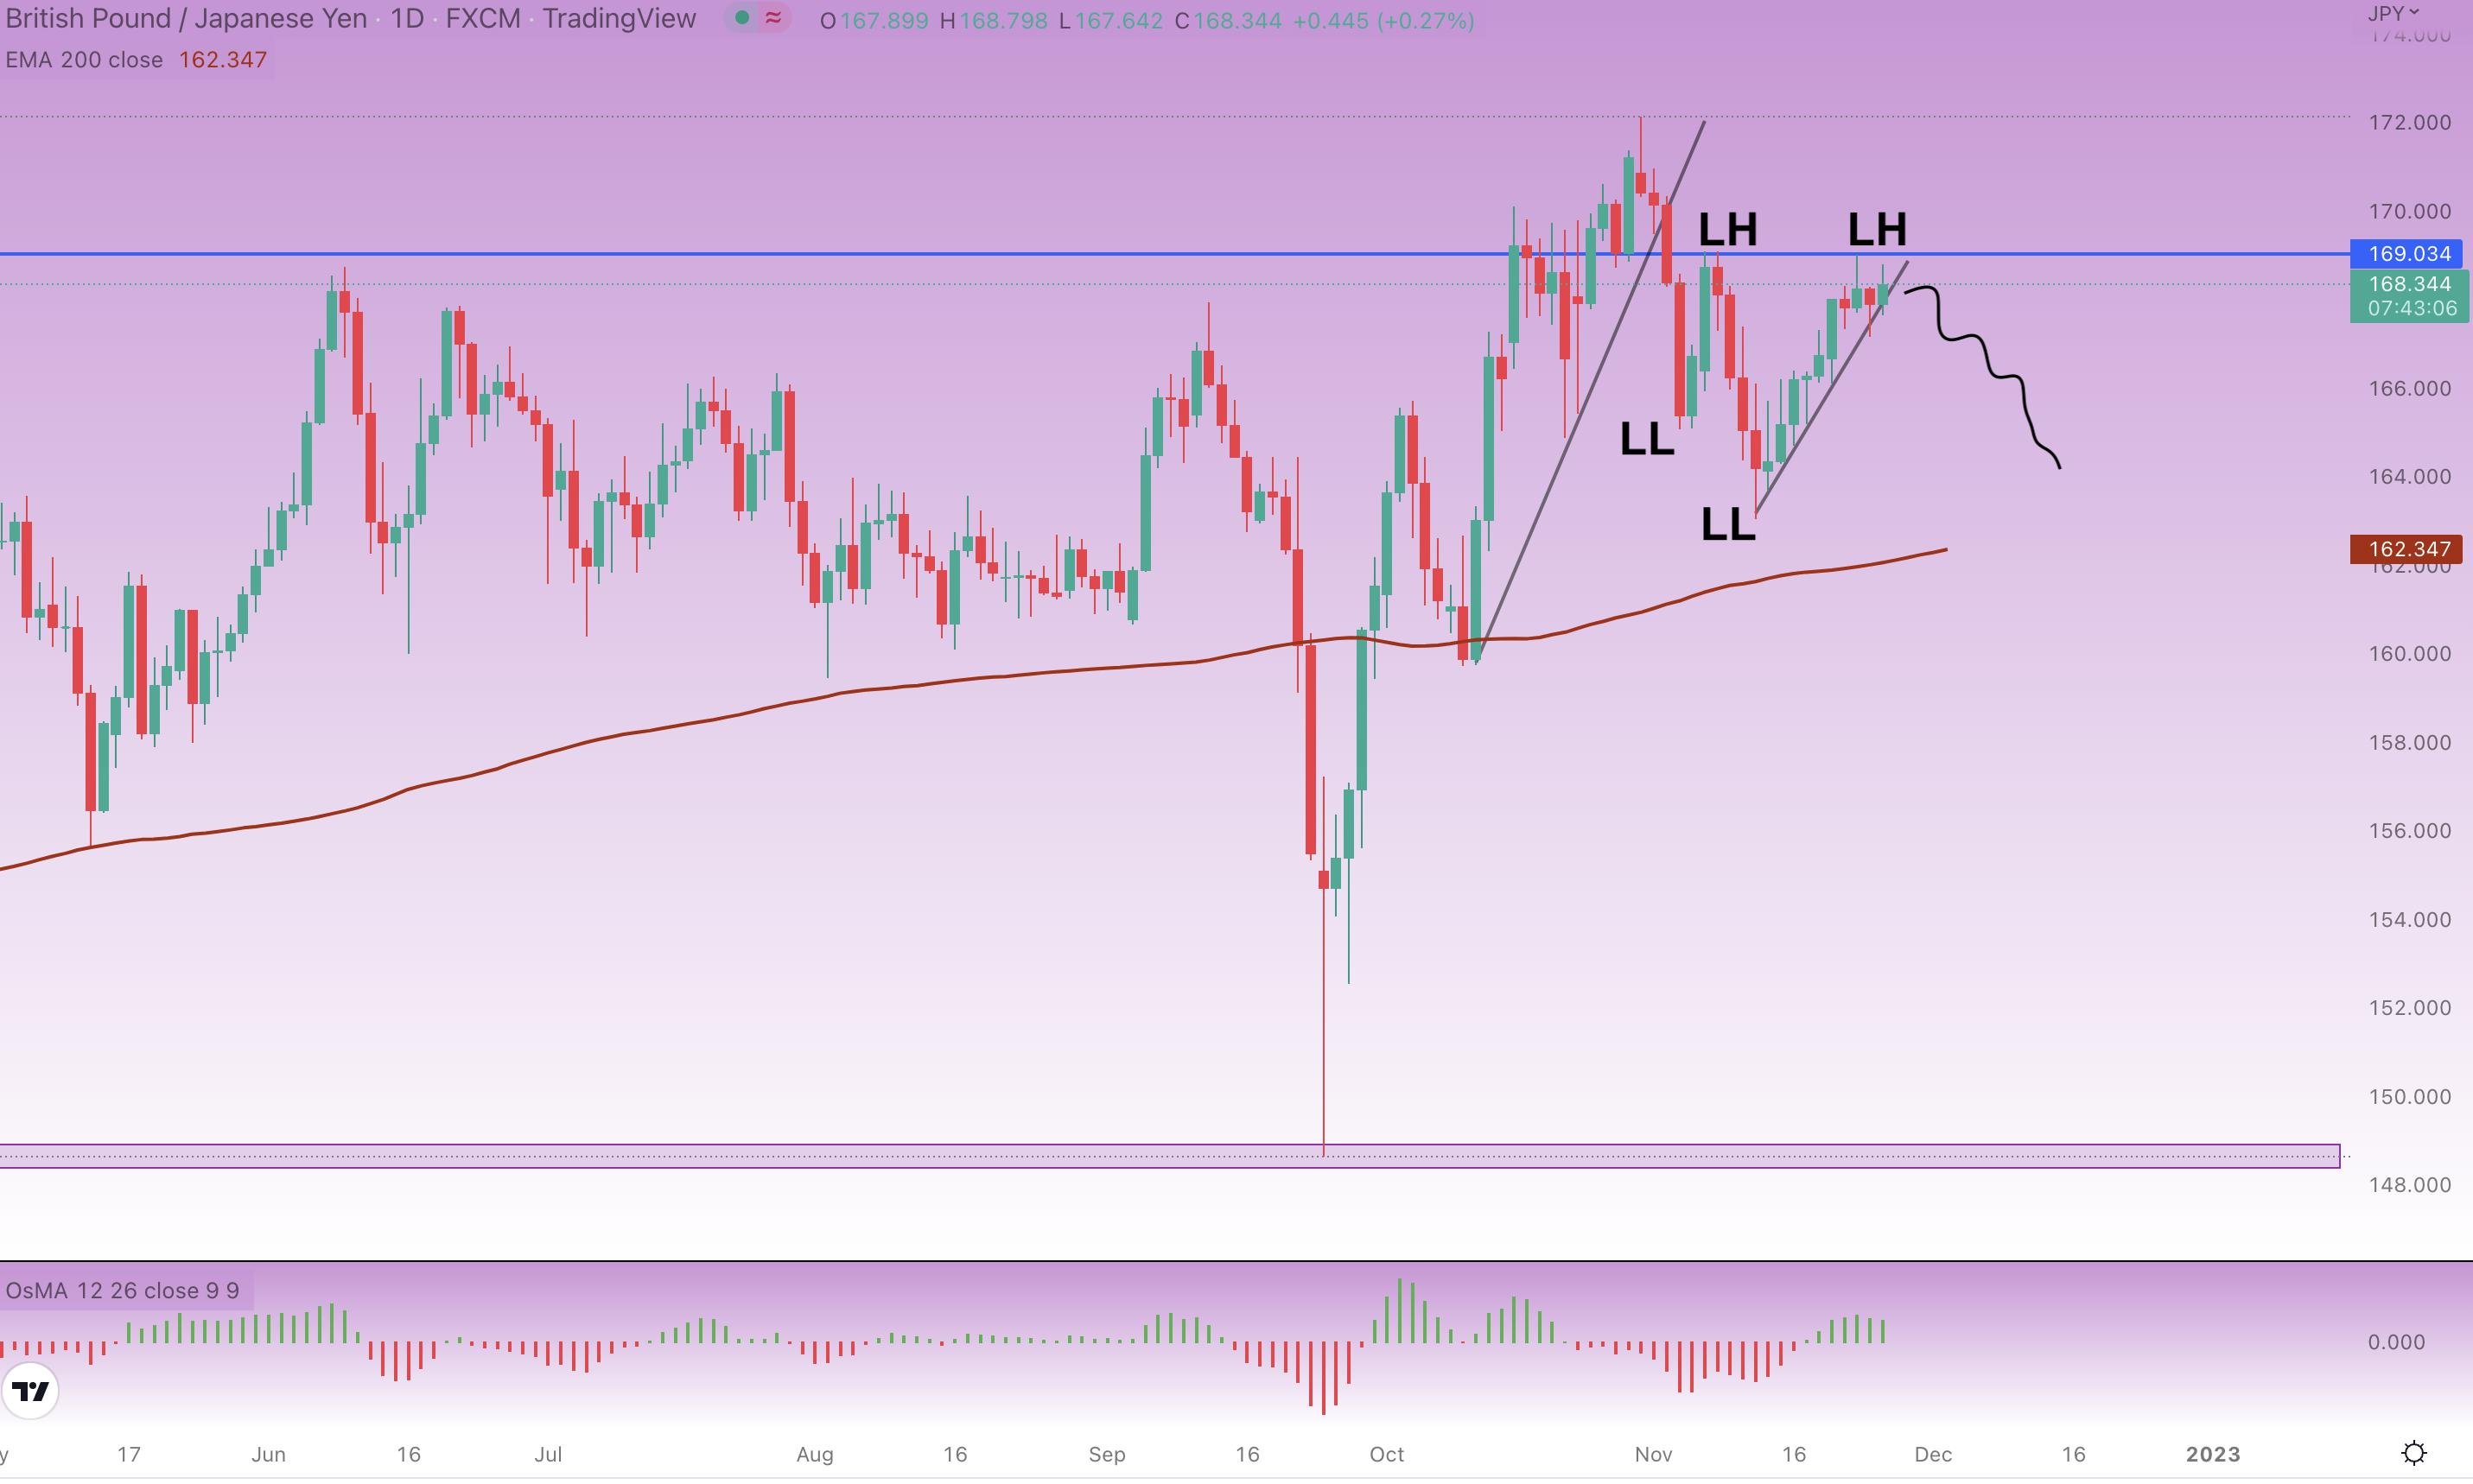 Forex analysis on EUR/USD, GBP/JPY and CAD/CHF